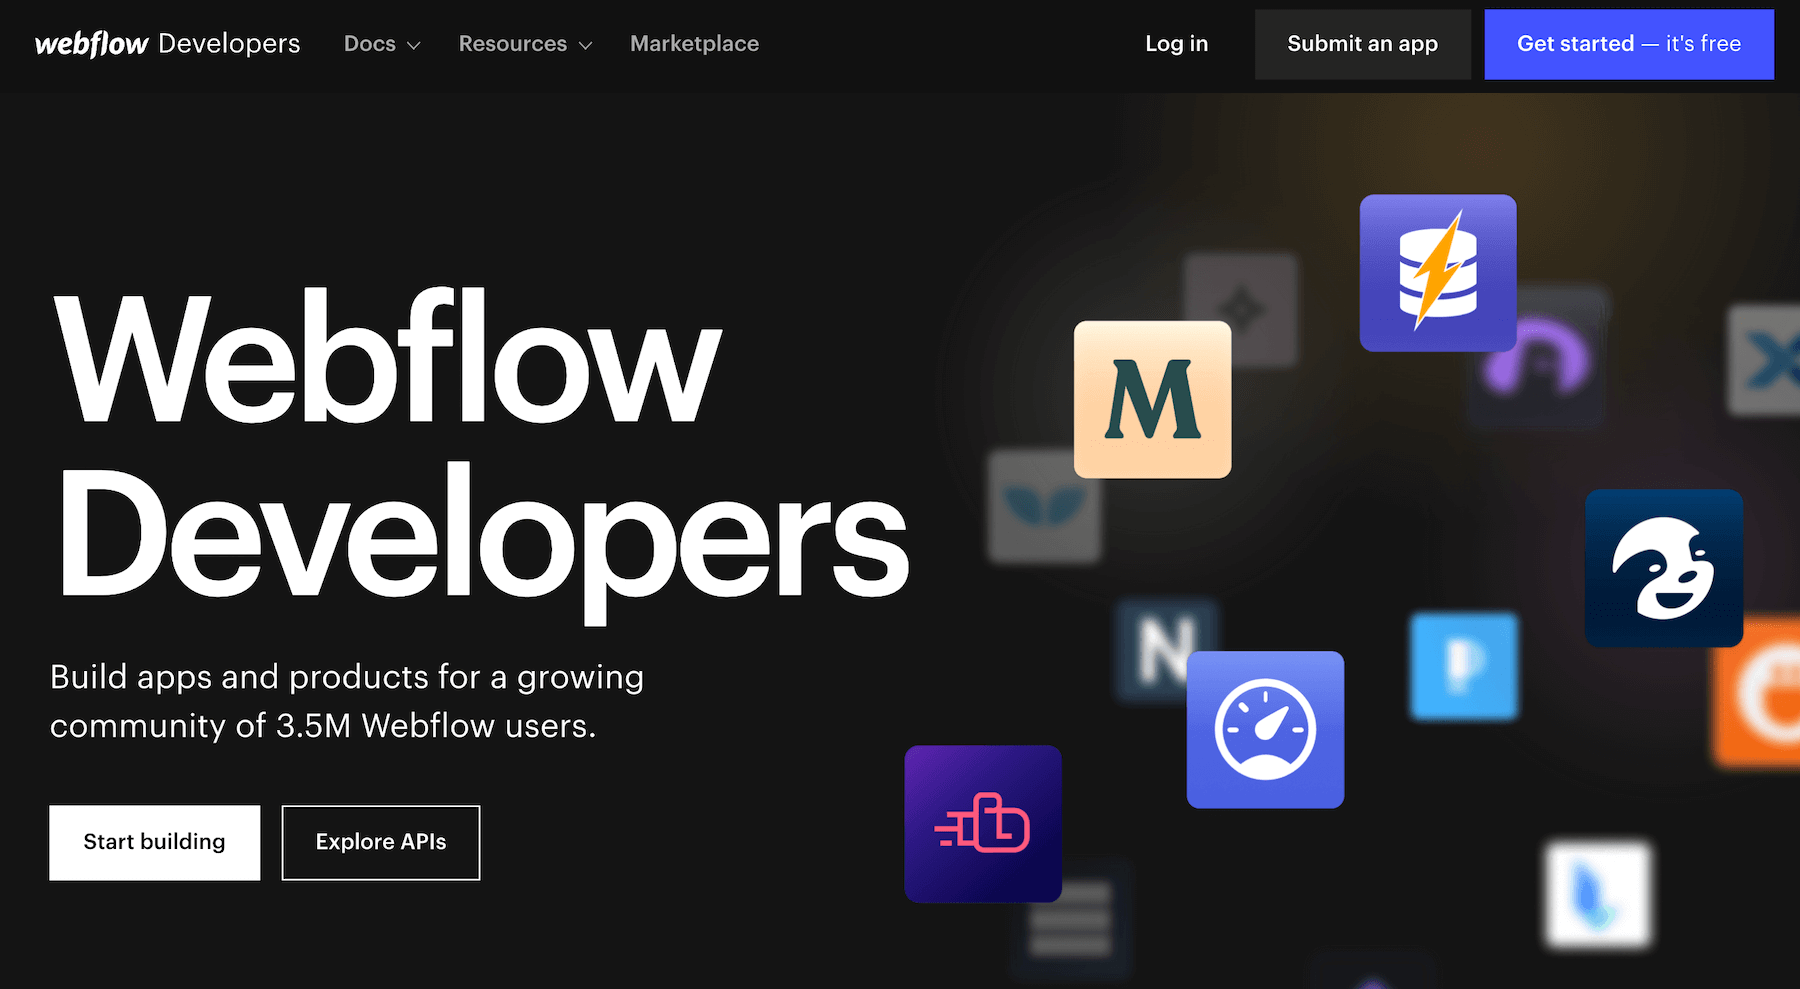 Webflow has an API that allows you to build on top of its core features.